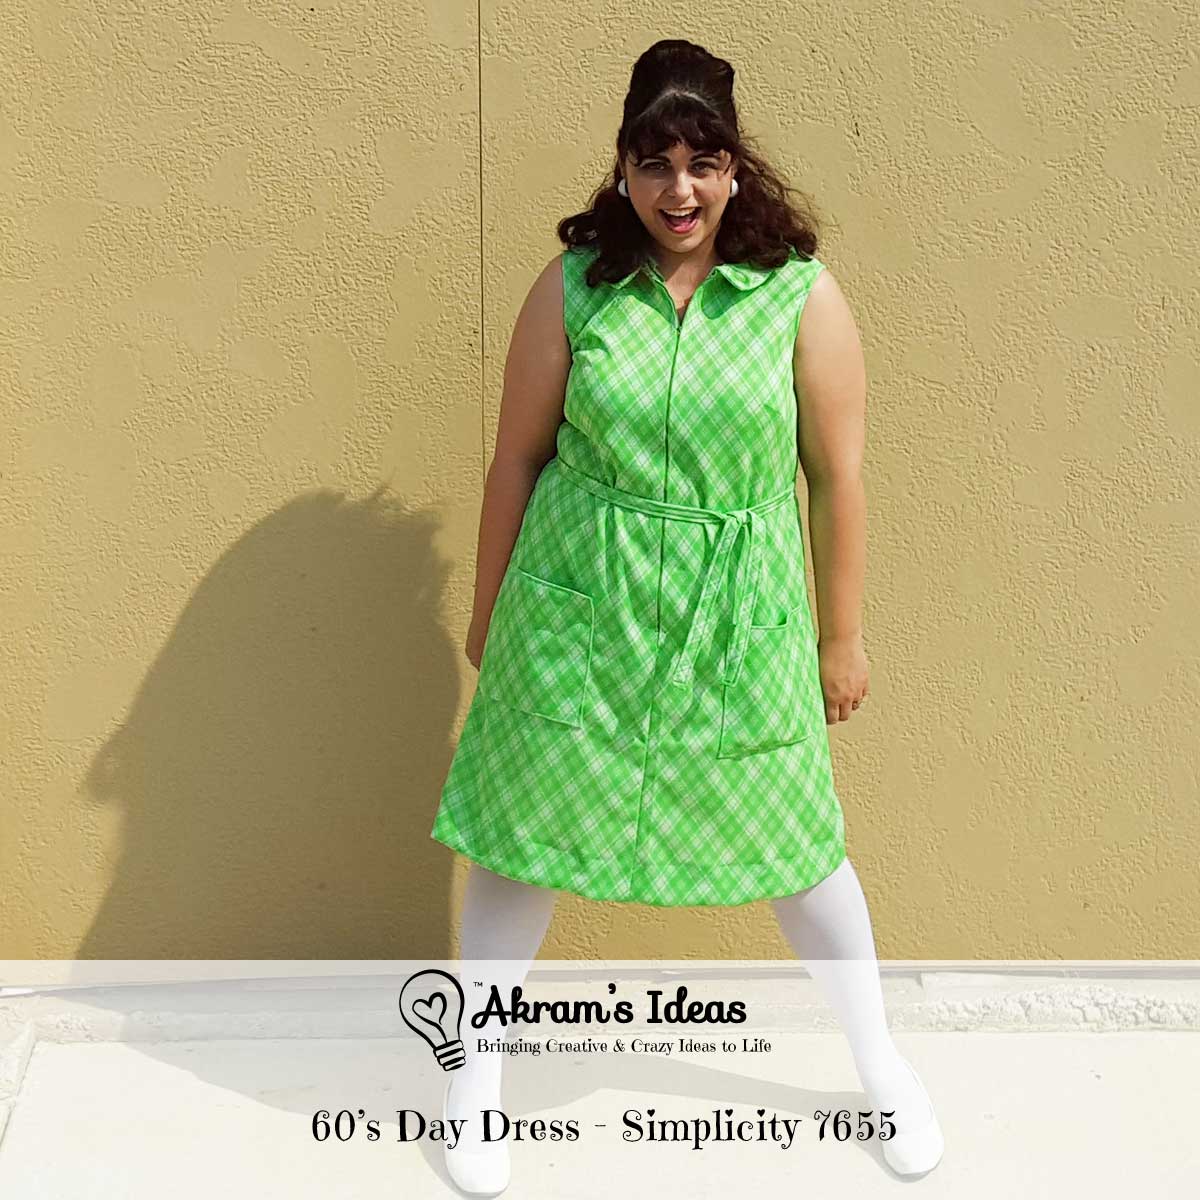 Review of my latest #vintagepledge pattern Simplicity 7655, which I made a fashionable 60’s day dress from vintage green plaid polyester.